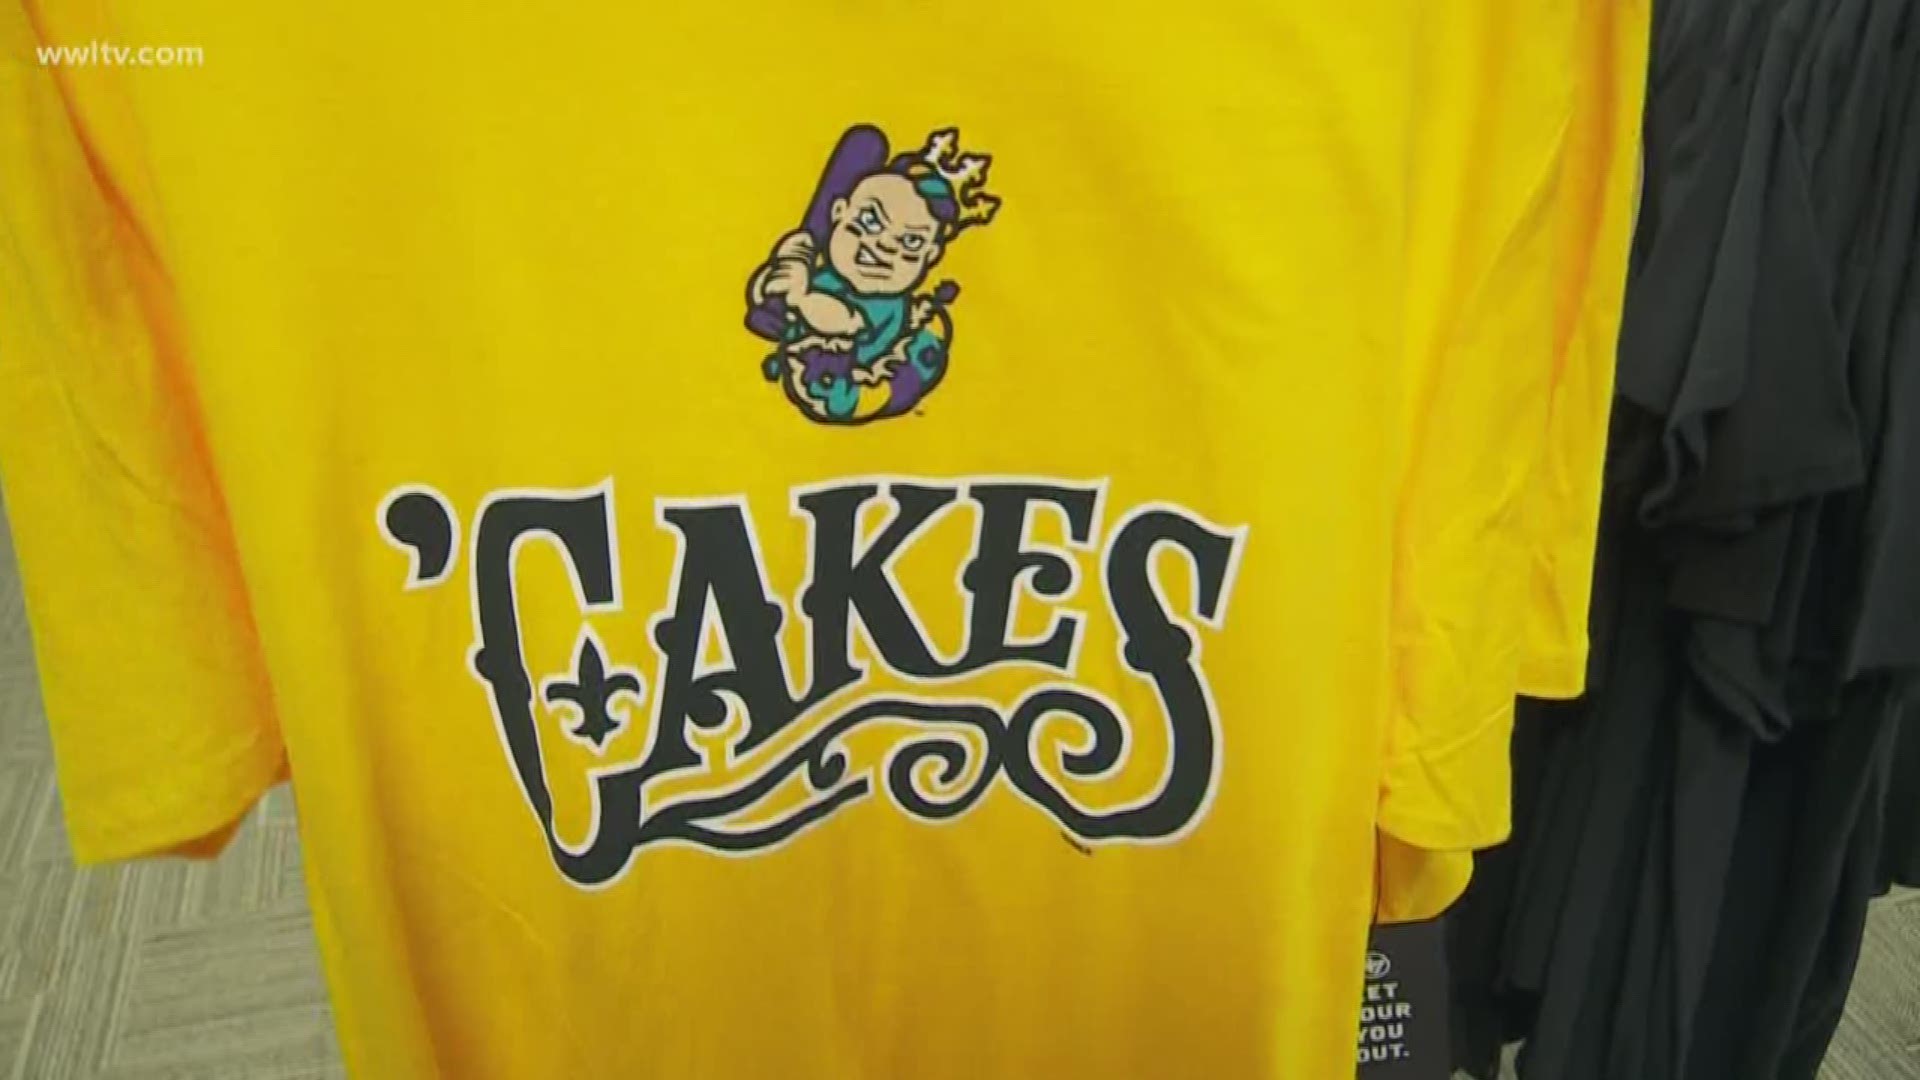 Wichita, Kansas, Mayor Jeff Longwell confirmed Thursday that the Baby Cakes have filed an application with Minor League Baseball as the team seeks to relocate to his city.